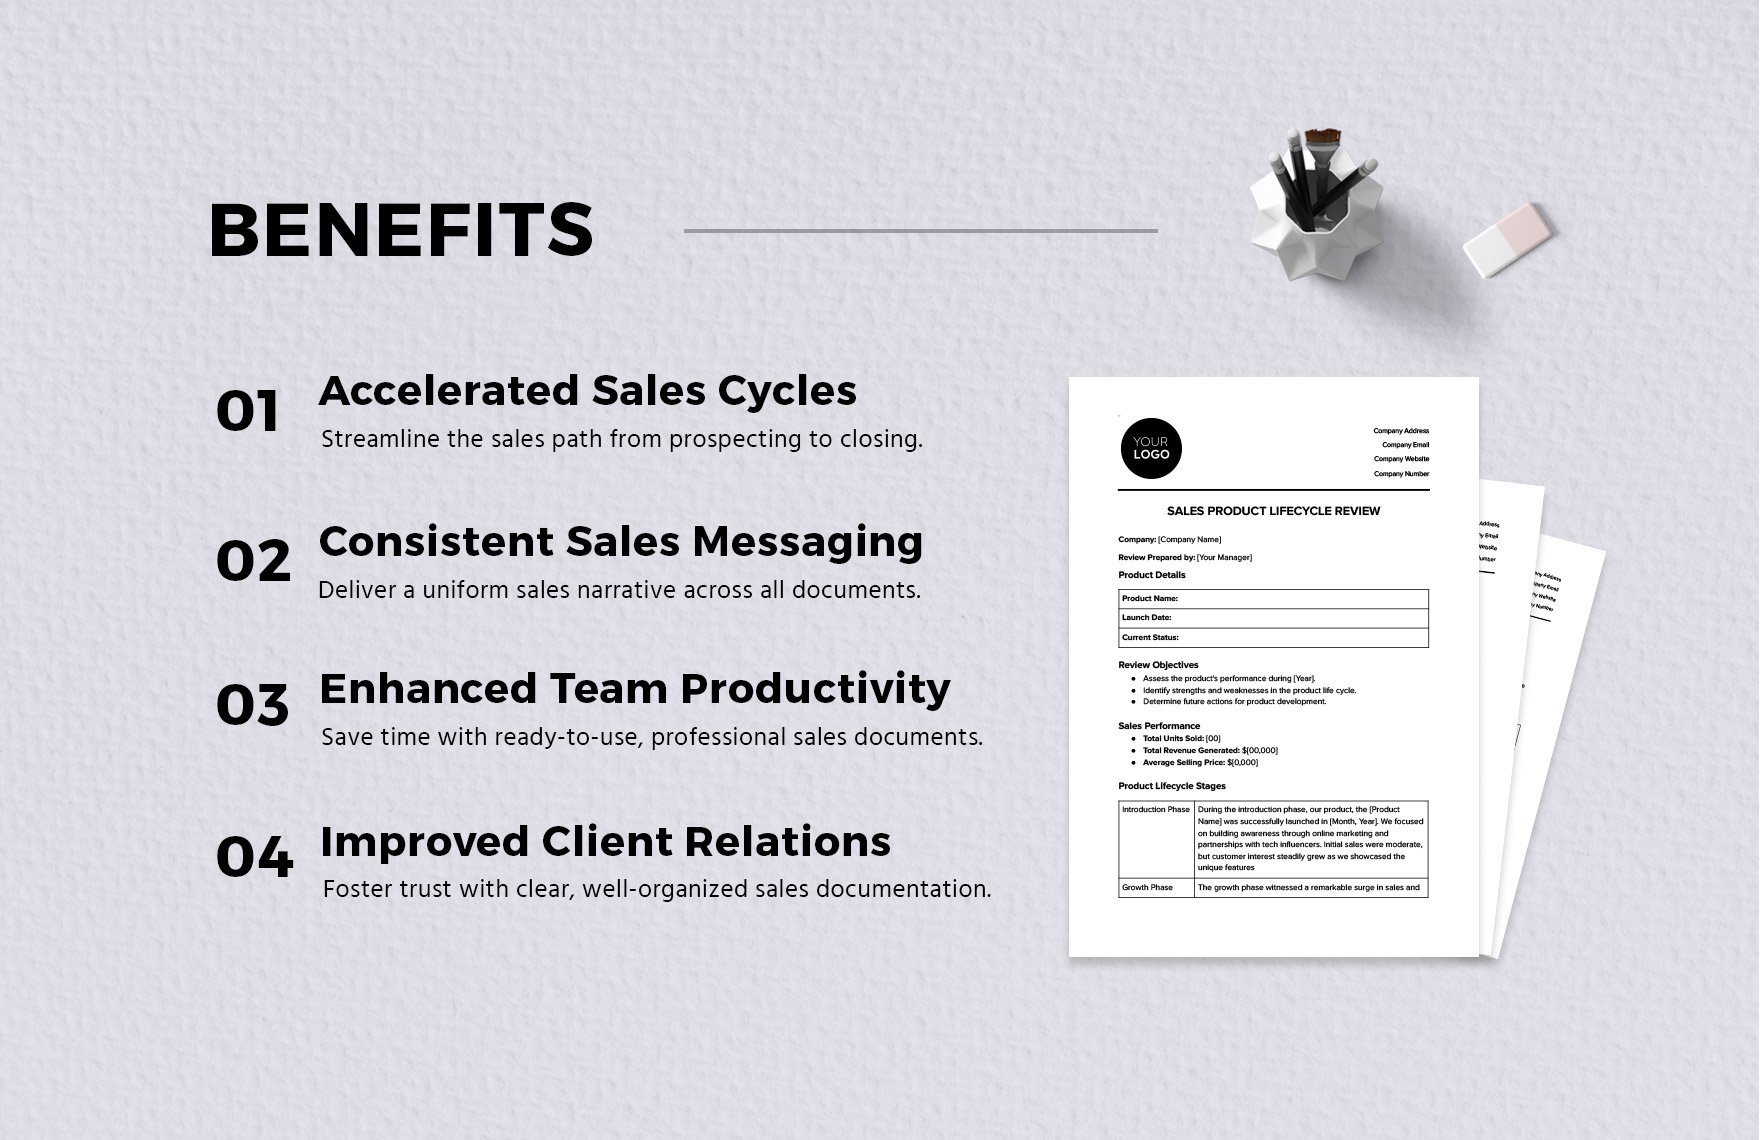 Sales Product Lifecycle Review Template